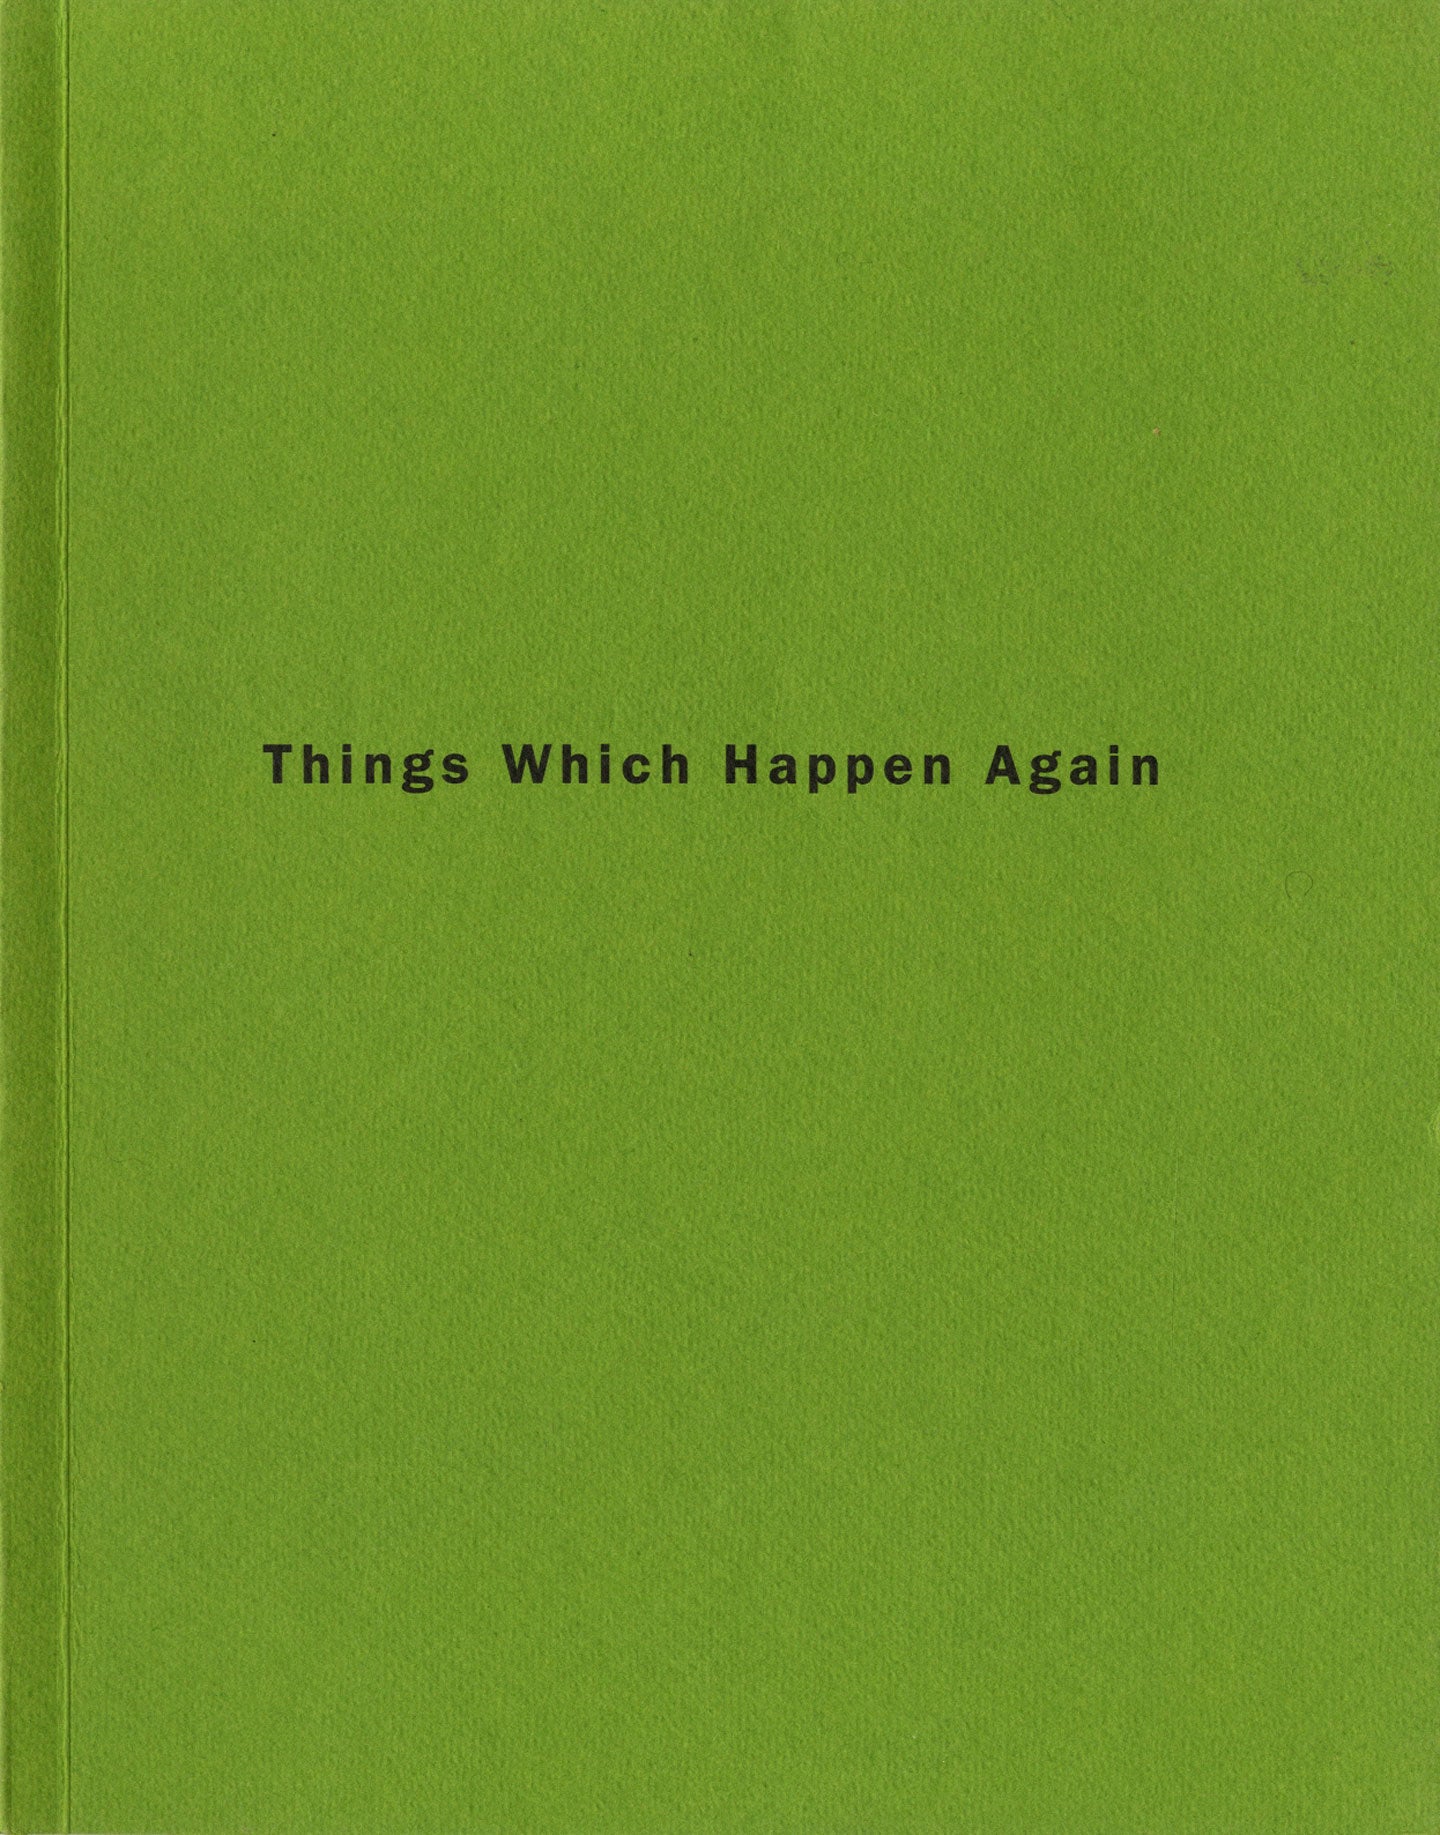 Roni Horn: Things Which Happen Again [SIGNED]